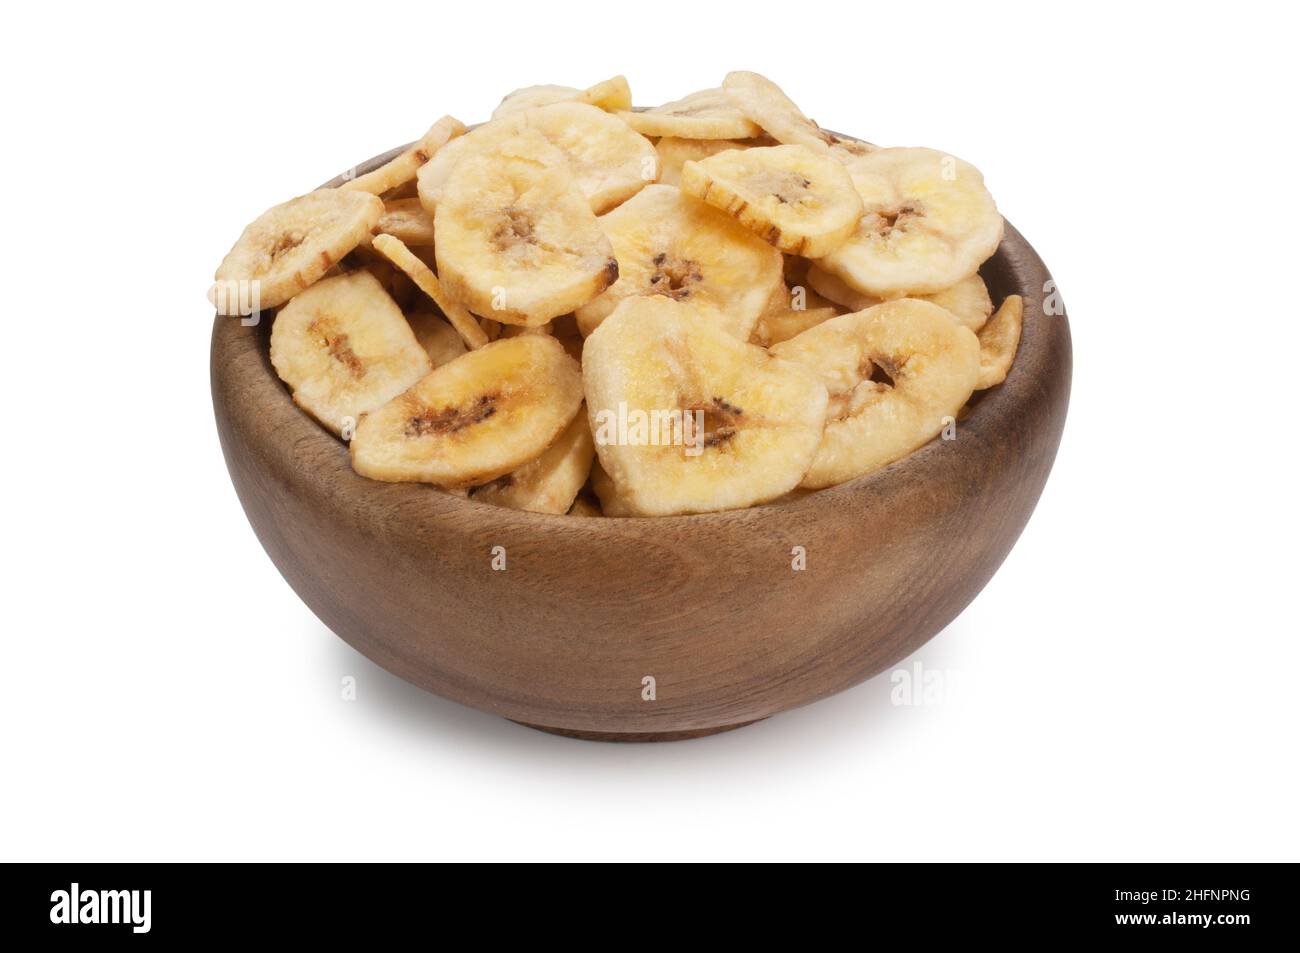 Studio shot of dried banana chips in a wooden bowl cut out against a white background - John Gollop Stock Photo